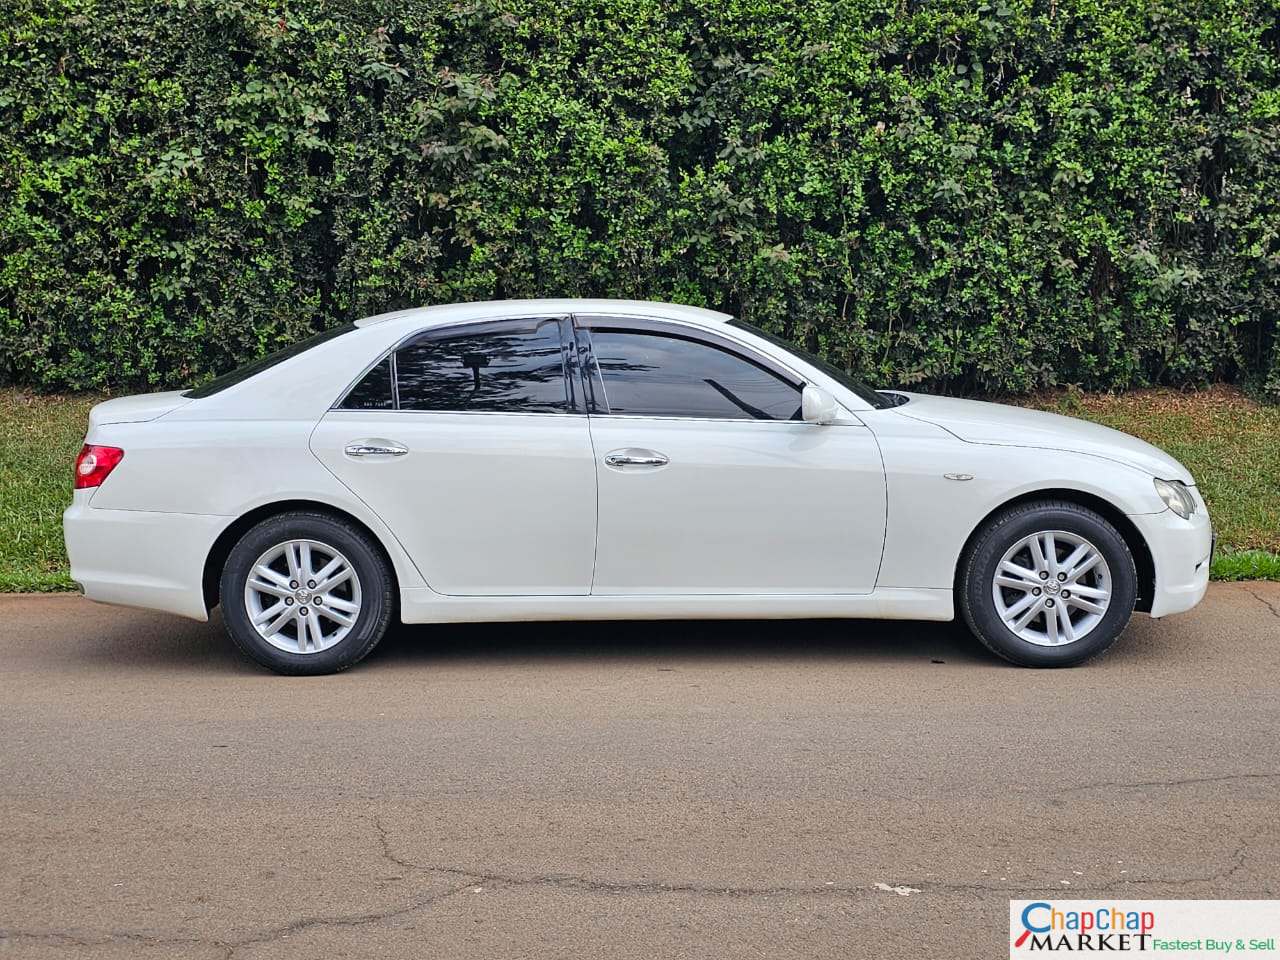 Cars Cars For Sale/Vehicles-Toyota Mark X for sale in Kenya ðŸ”¥ You Pay 30% Deposit Trade in OK EXCLUSIVE 9